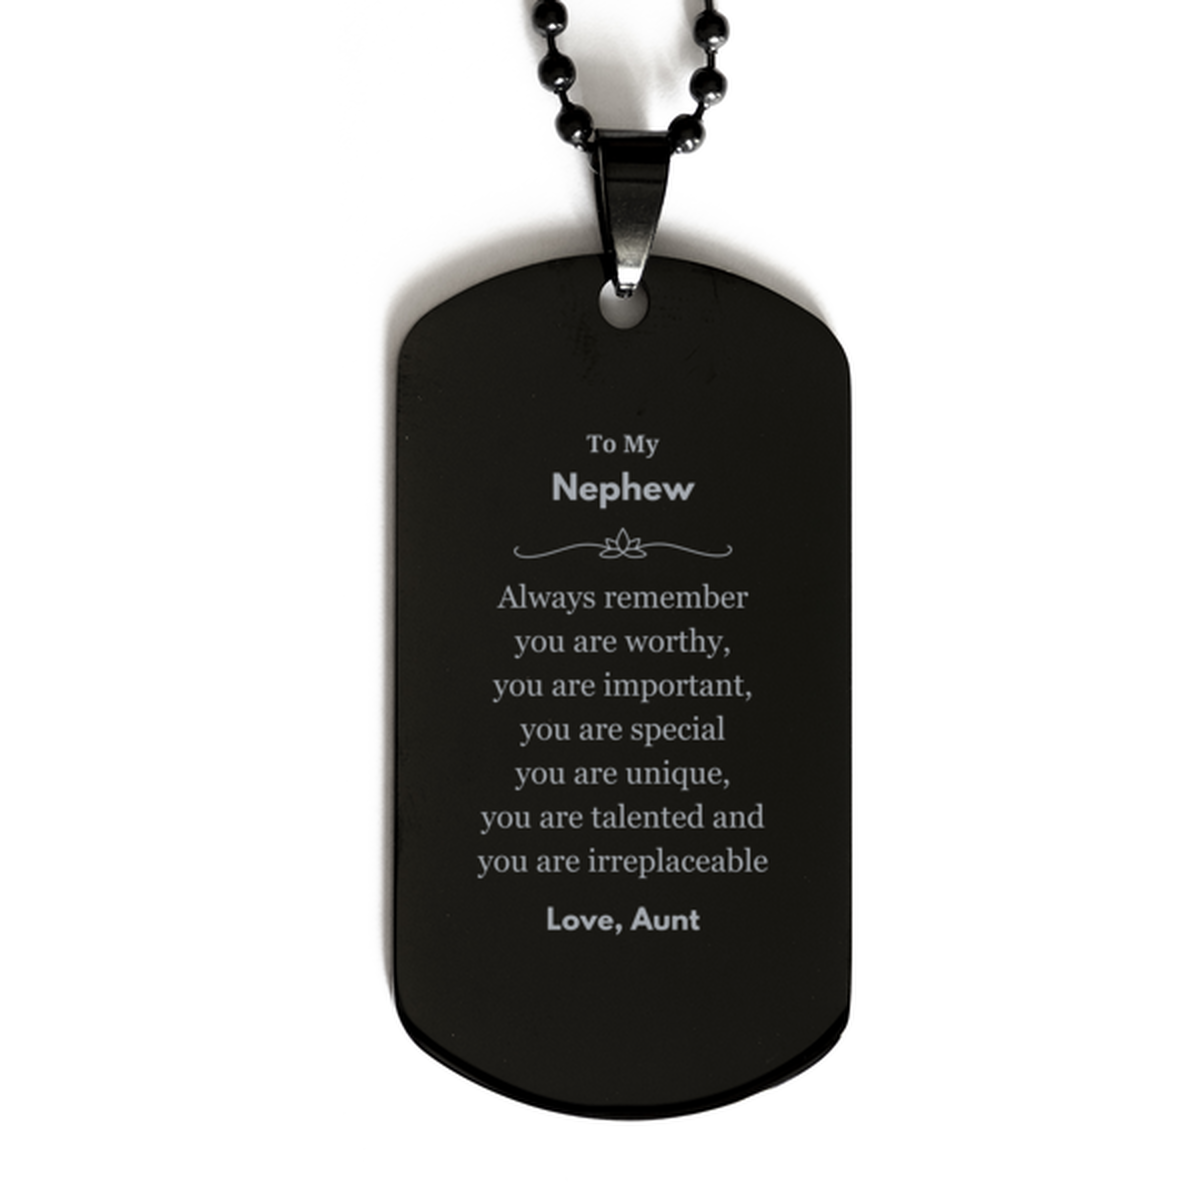 Nephew Birthday Gifts from Aunt, Inspirational Black Dog Tag for Nephew Christmas Graduation Gifts for Nephew Always remember you are worthy, you are important. Love, Aunt